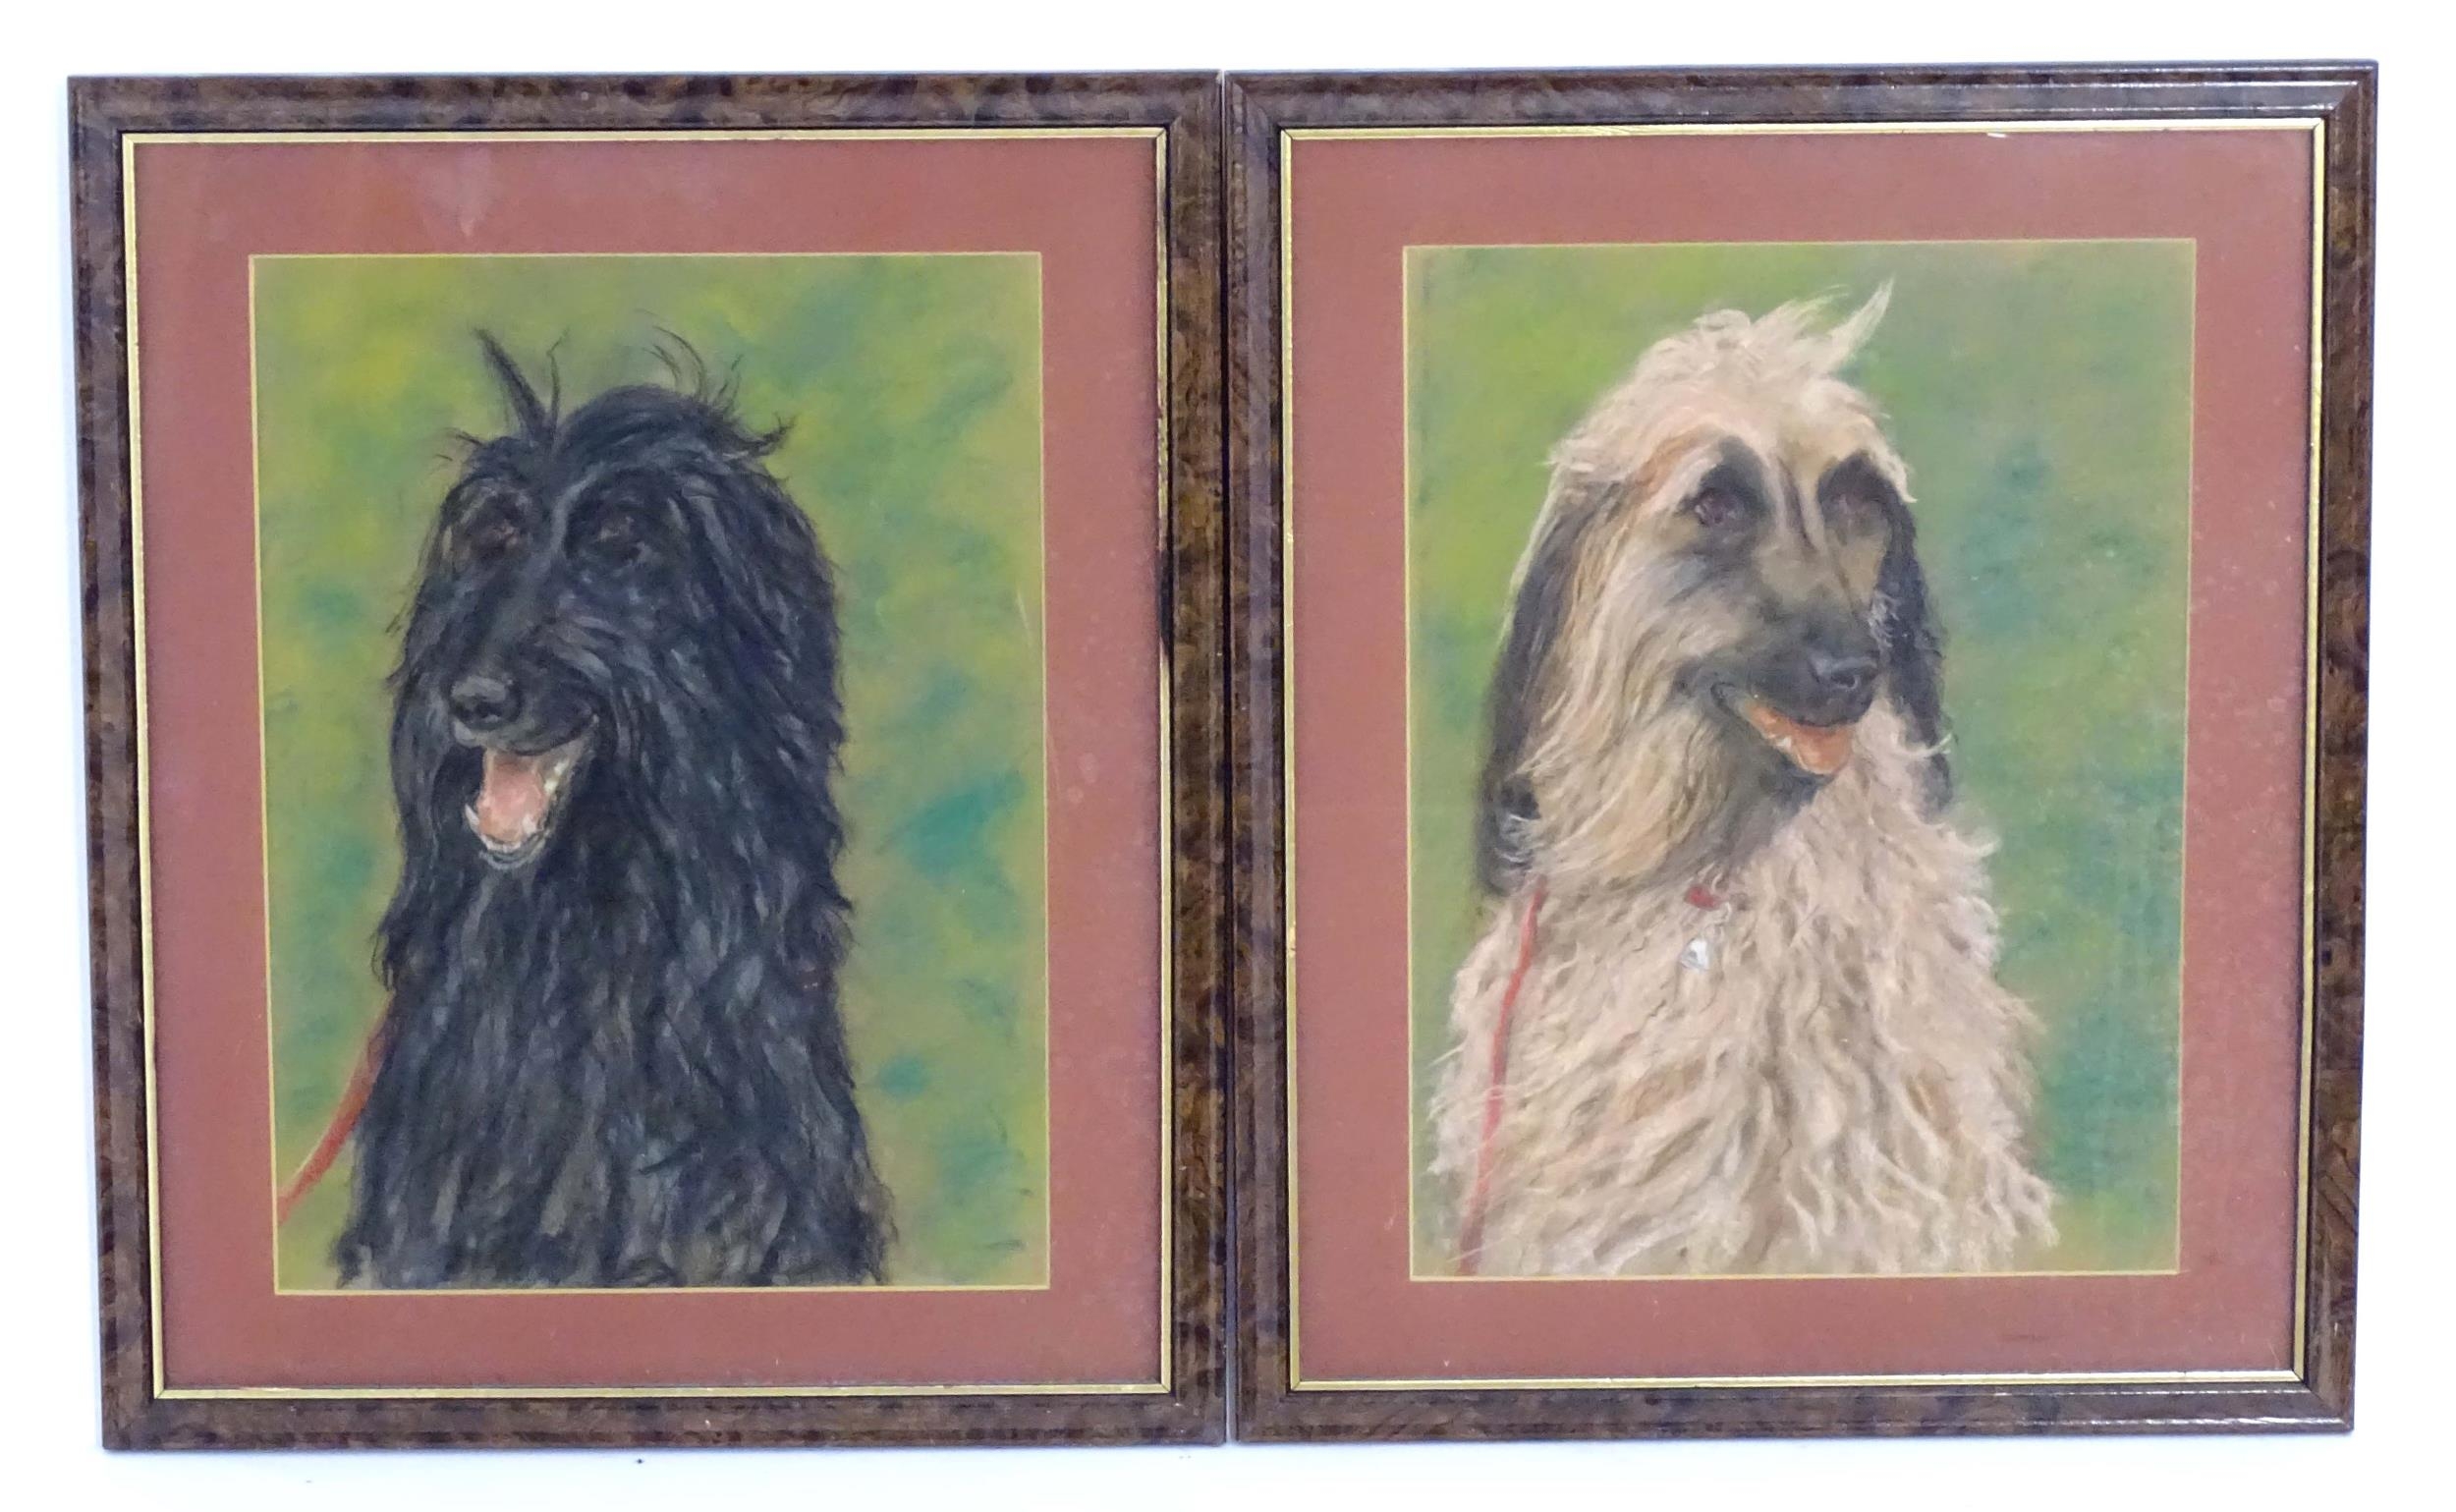 20th century, Pastel on paper, A pair of dog portraits depicting Afghan Hounds. Approx. 16 1/4" x